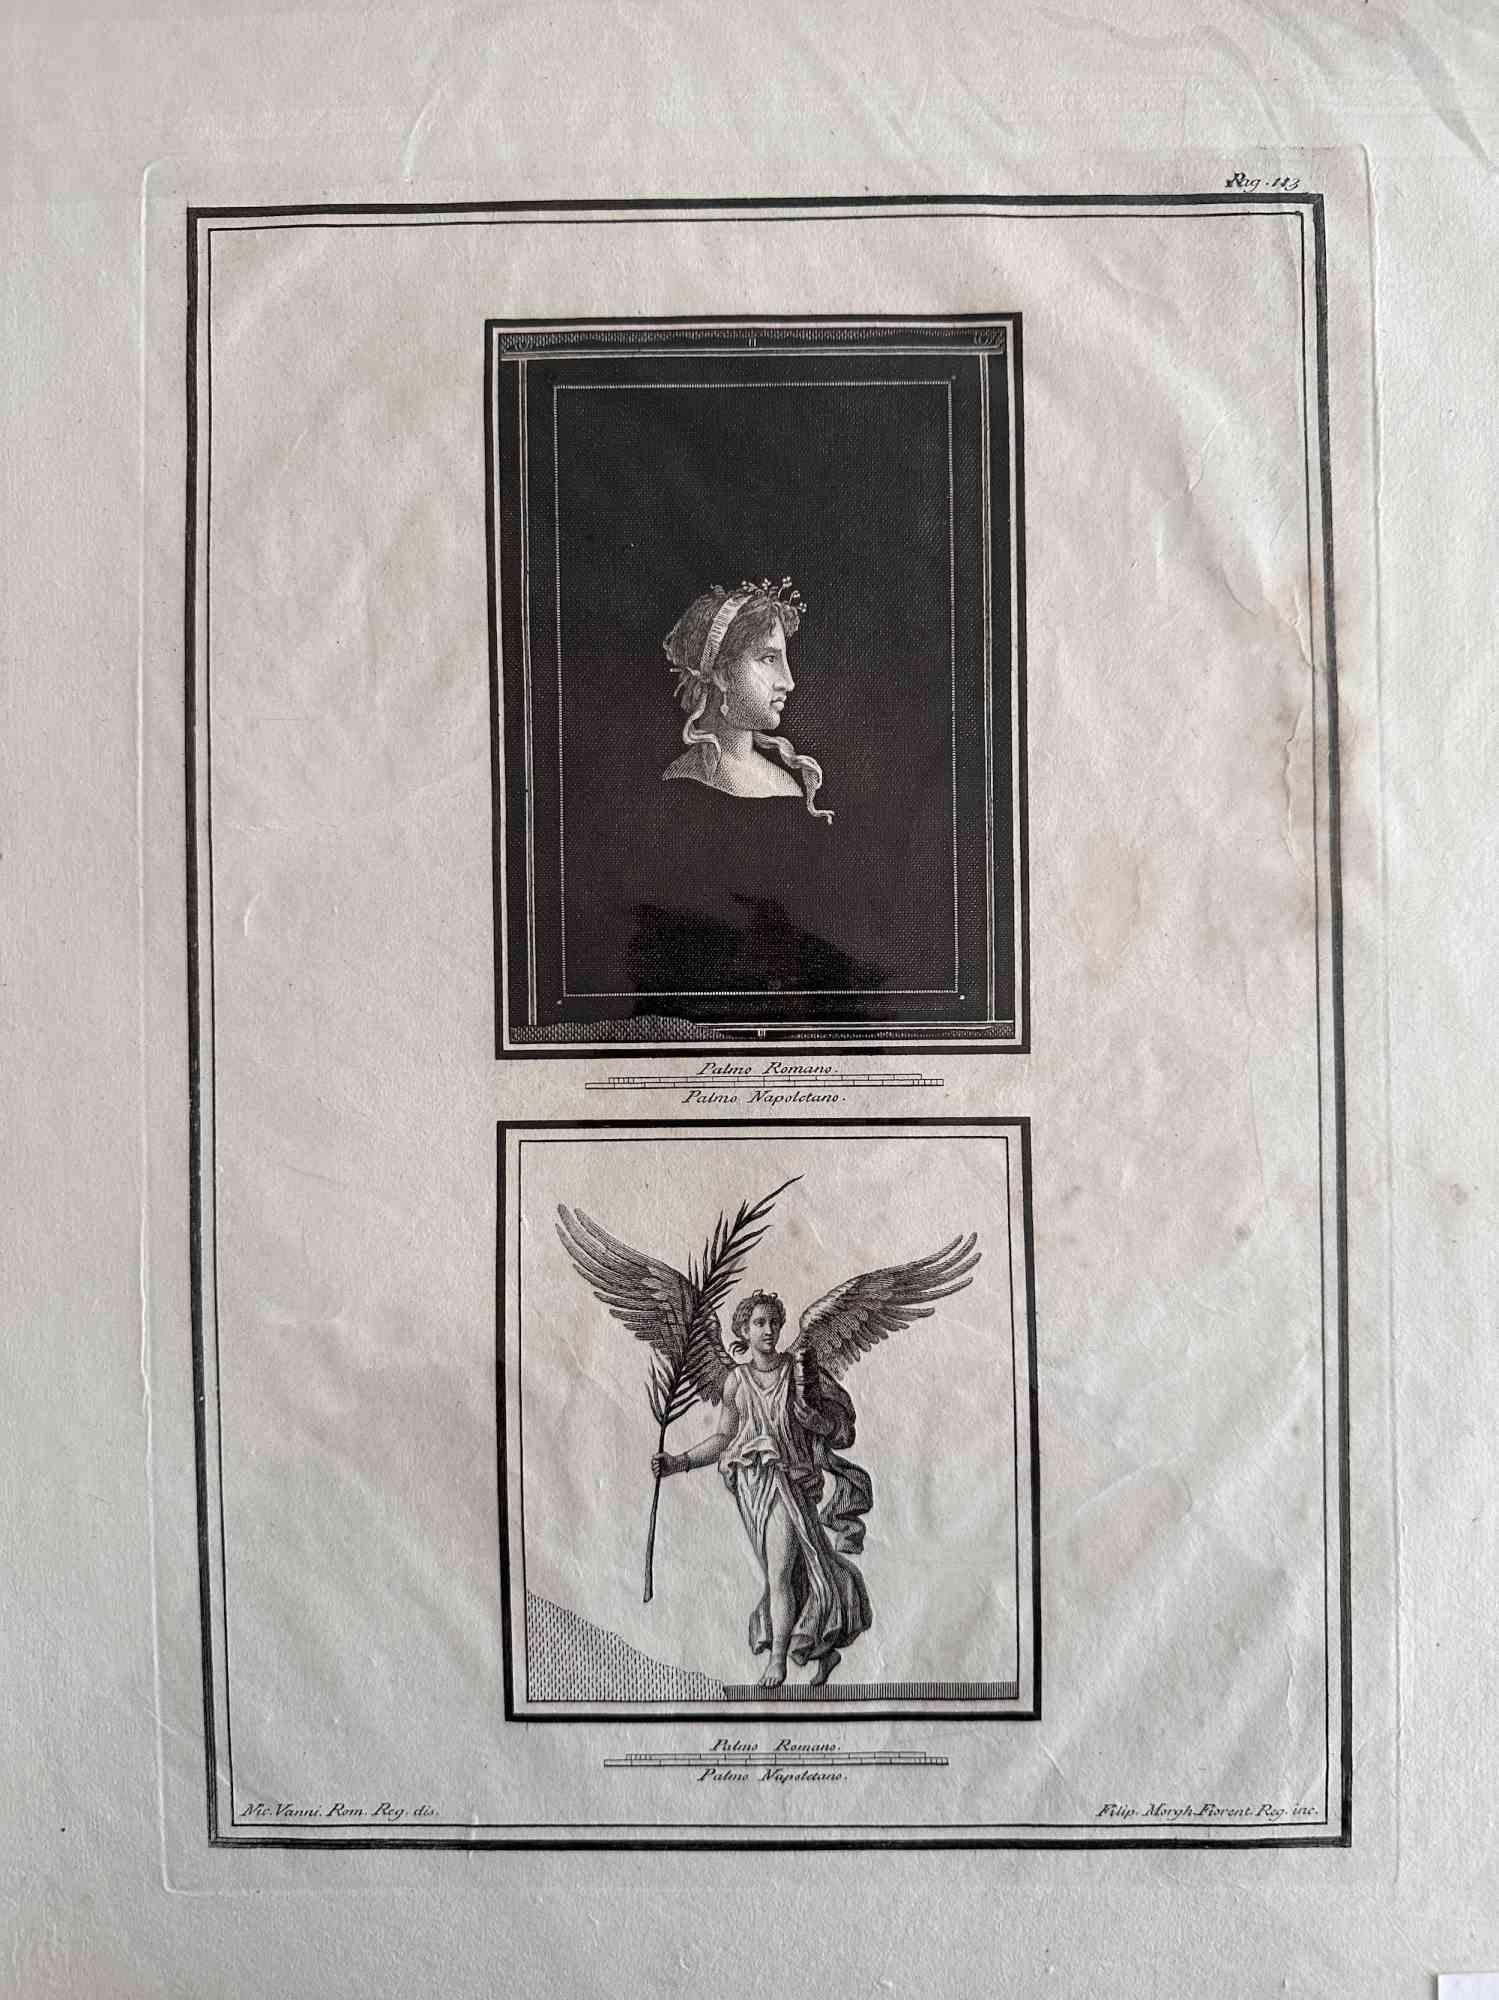 Decorative Wall Fresco from "Antiquities of Herculaneum" is an etching on paper realized by Filippo Morghen in the 1780s.

Signed on the plate.

Good conditions with slight folding on margins.

The etching belongs to the print suite “Antiquities of